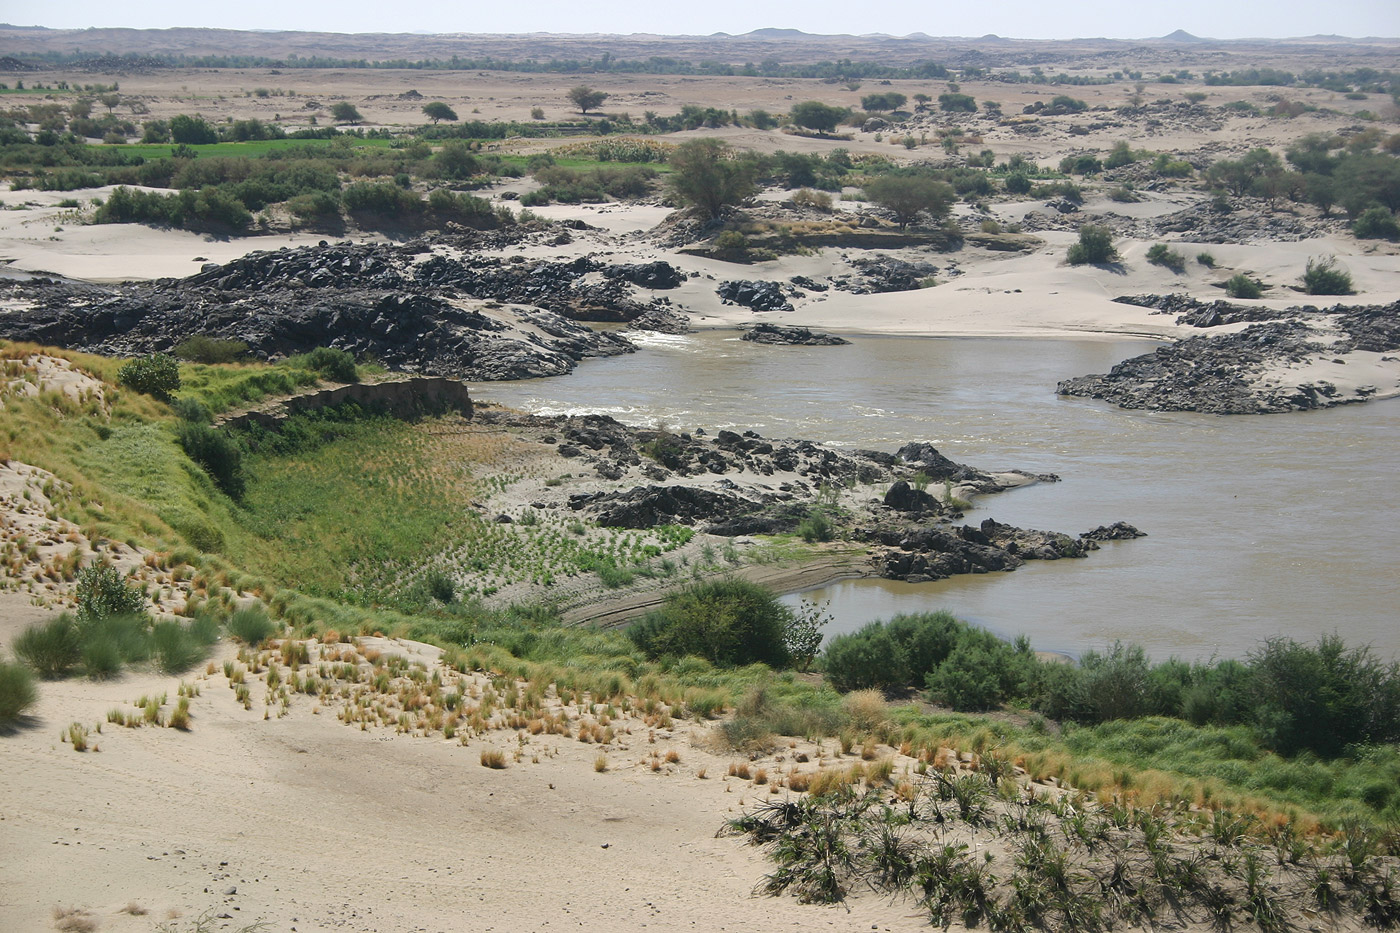 The 4th Nile cataract in Sudan showing rocky landscape, rapids, and scarcity